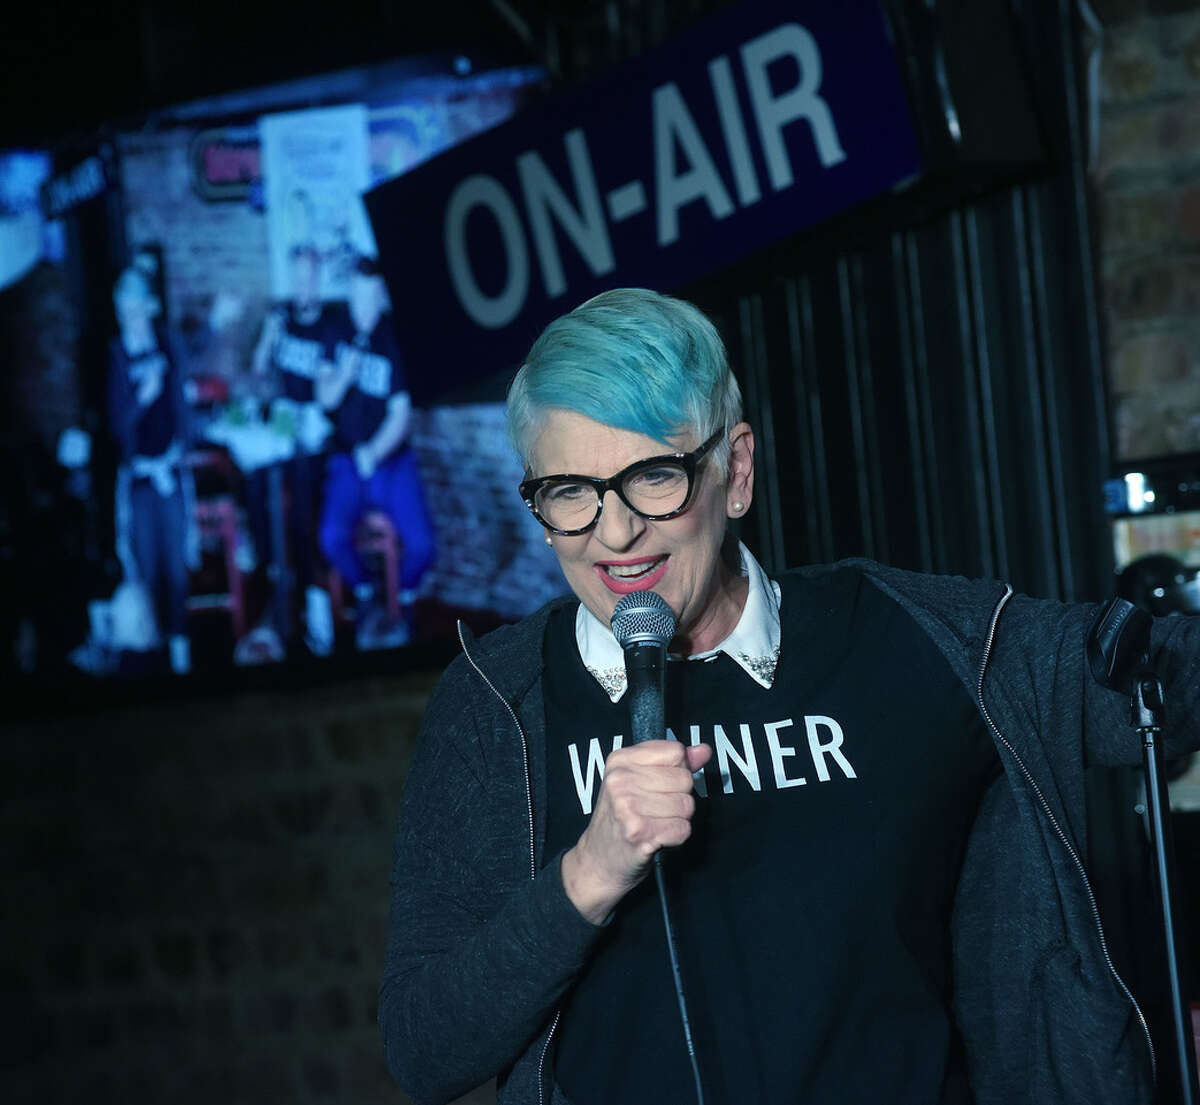 Lisa Lampanelli performs at The Stress Factory Comedy Club on December 9, 2021 in New Brunswick, New Jersey. Of the club, she said, “To be honest, it is really an honor to work there. It’s considered an upper-level club, that’s one that you can put on the resume. I really loved it."